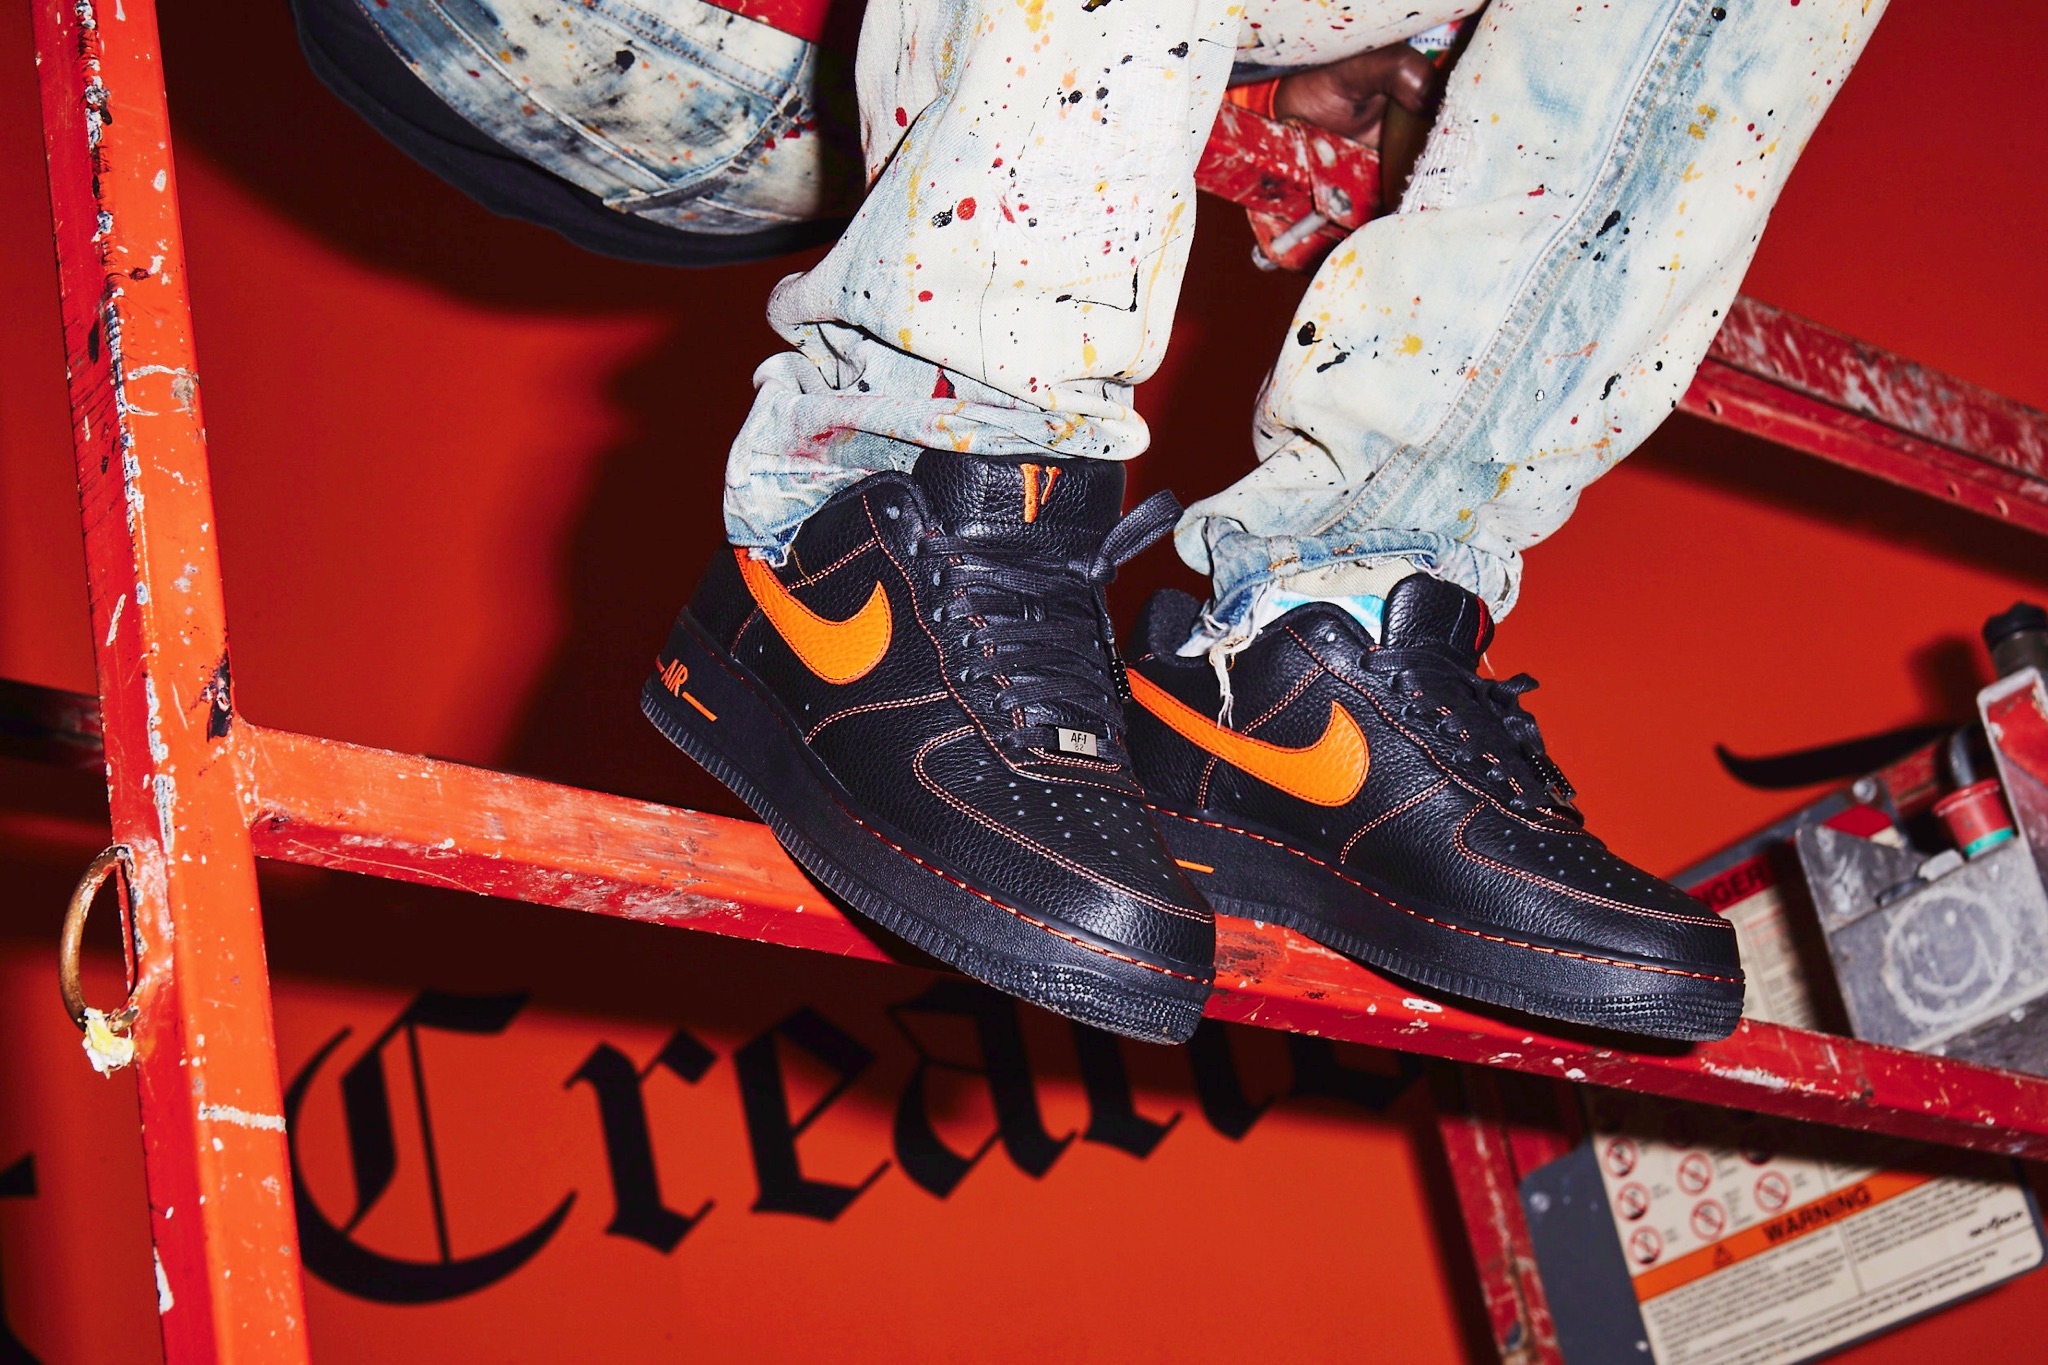 ASAP Bari's Nike Air 1 Means A Lot to Harlem | Complex